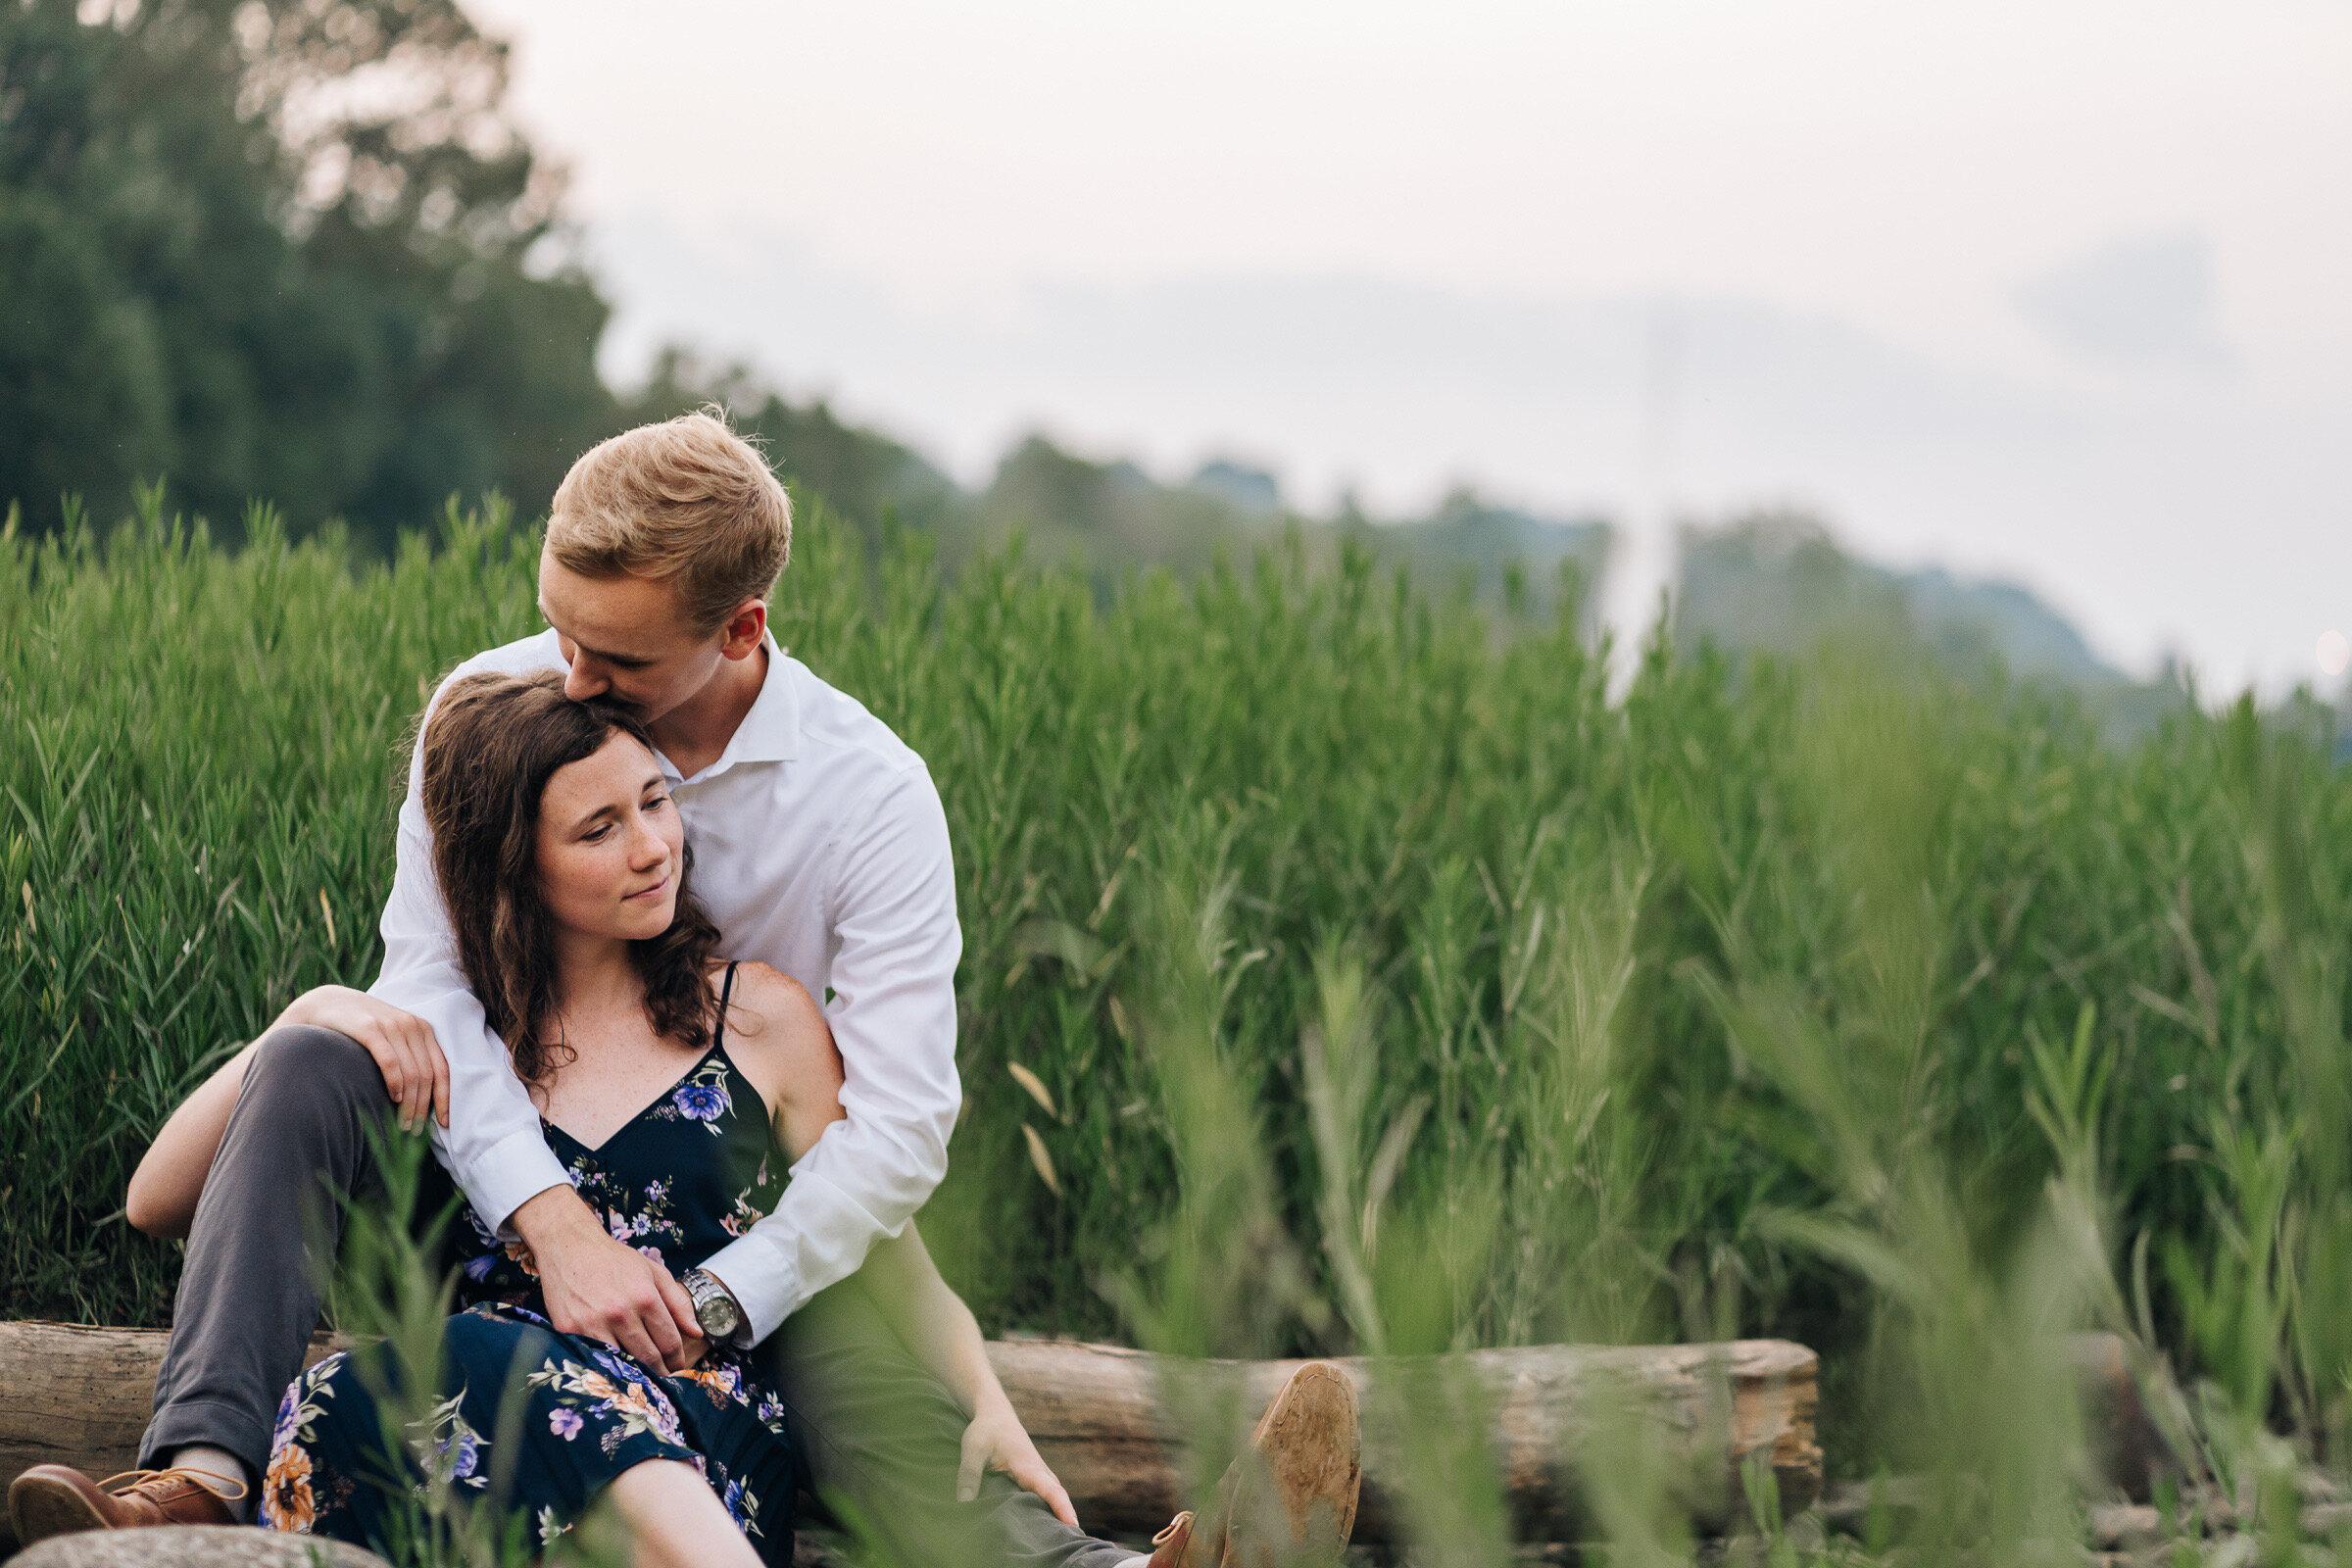 grant-rachel-downtown-lynchburg-virginia-summer-lifestyle-in-the-river-romantic-flirty-and-fun-engagement-session-by-jonathan-hannah-photography-16.jpg